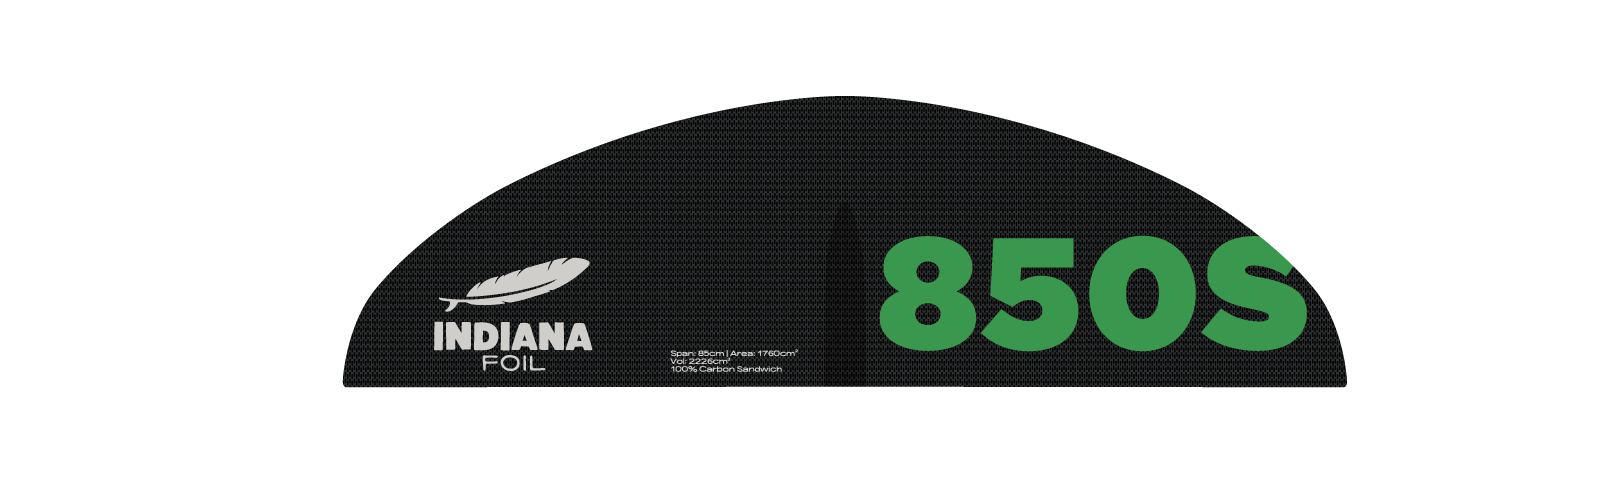 Indiana Foil Front Wing 850S